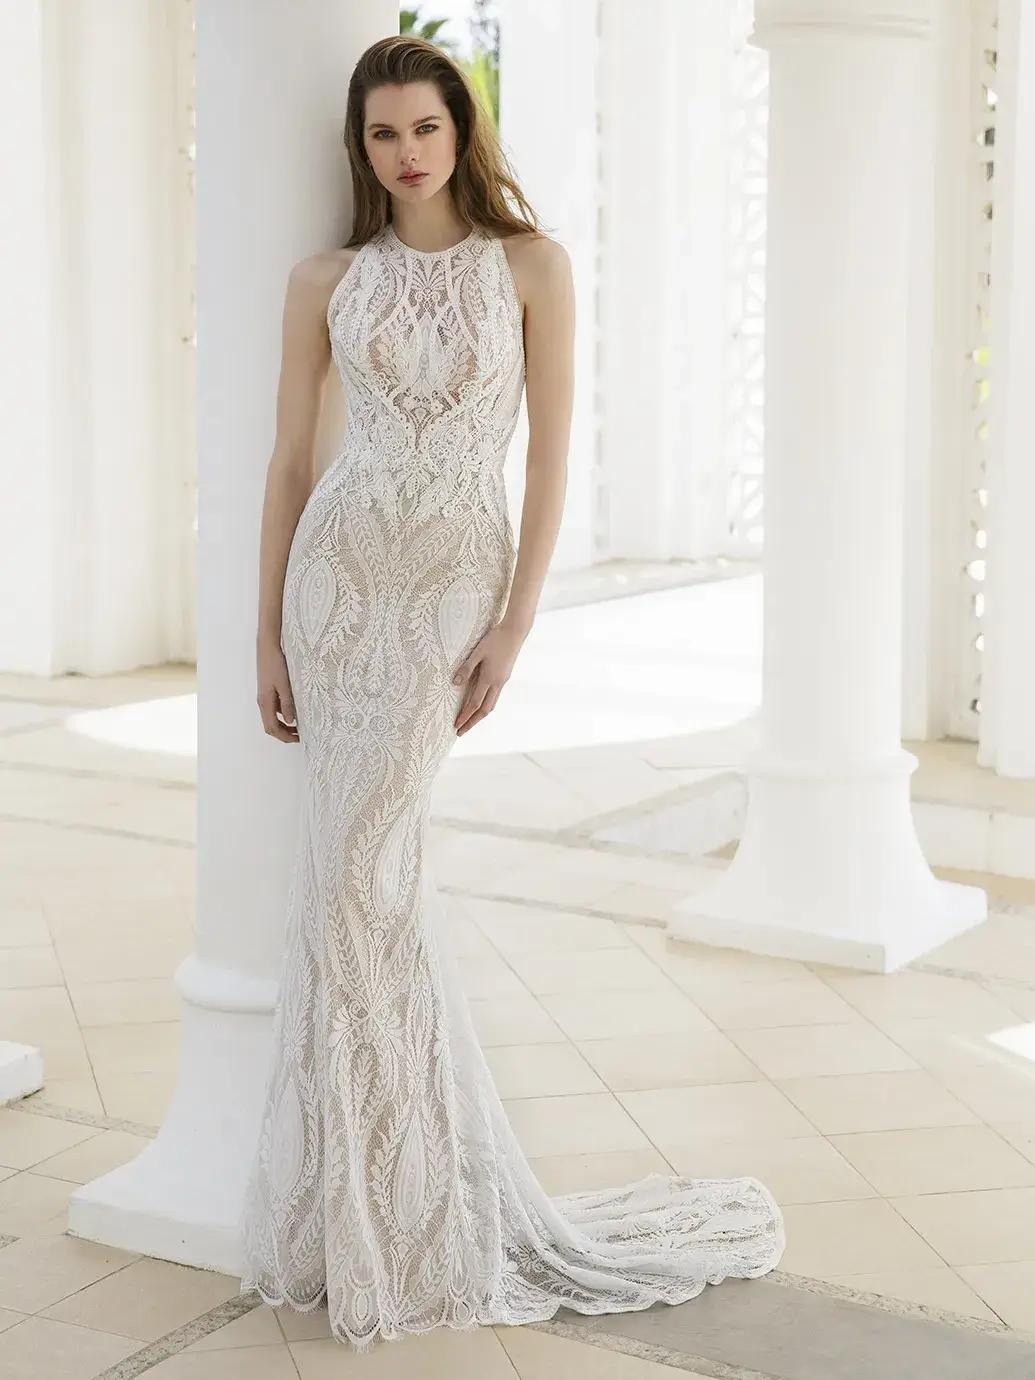 2024 Vision: The Hottest Trends in Bridal Gowns for the New Year Image